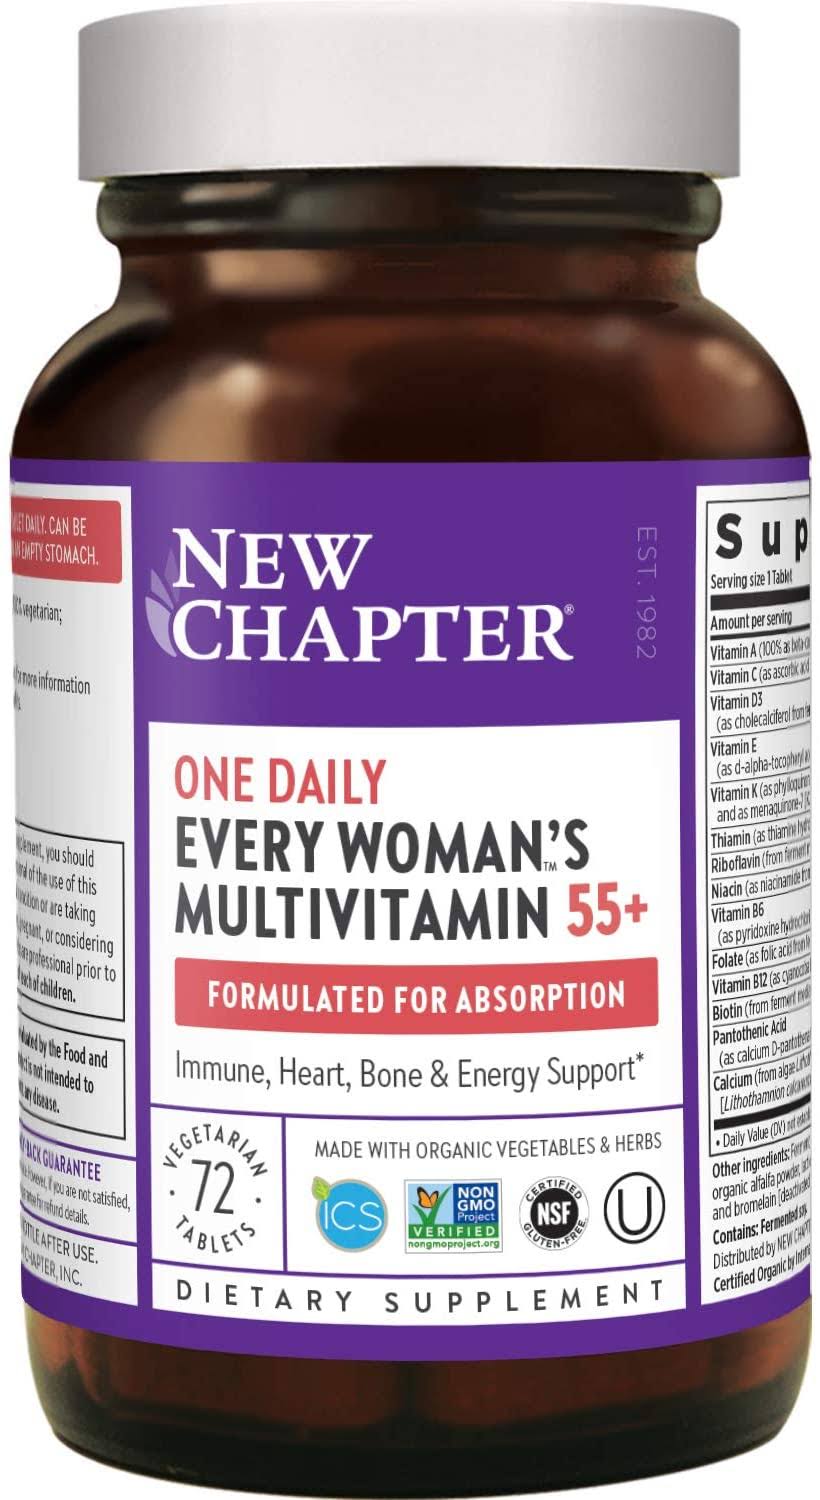 New Chapter Whole-Food Multivitamin, 55+, Every Woman's One Daily, Vegetarian Tablets - 72 tablets